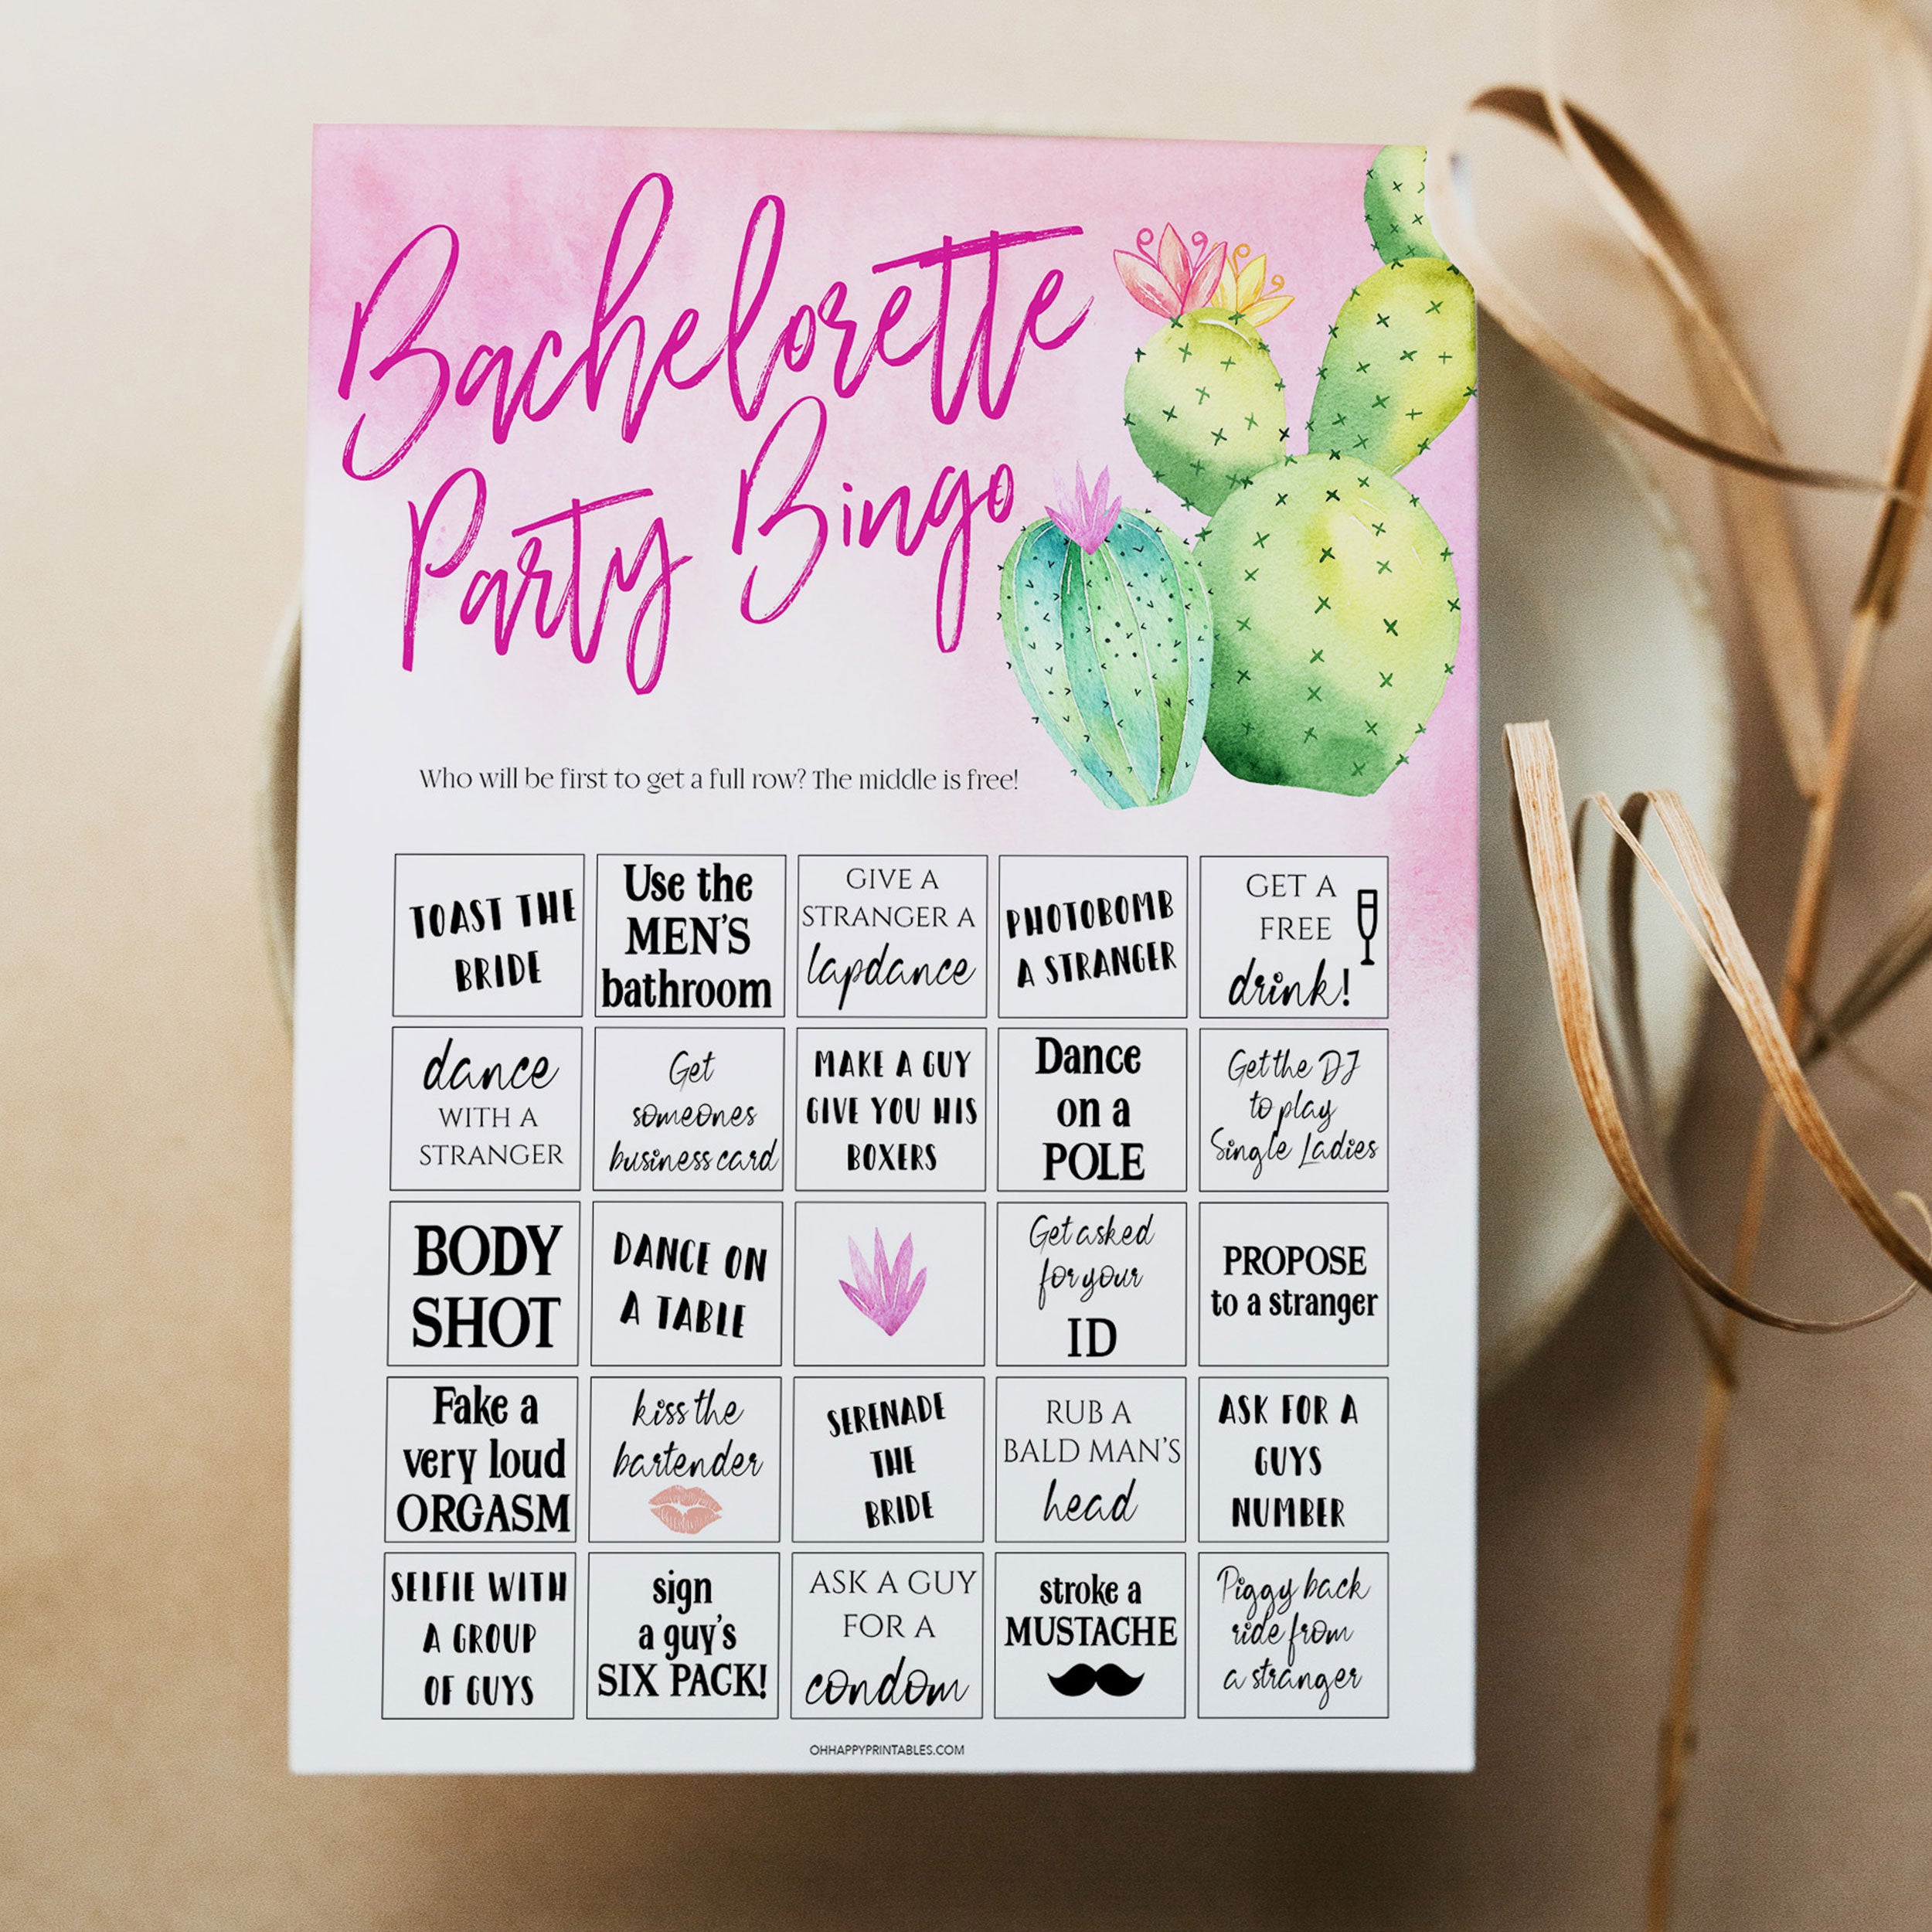 Bachelorette party game Bachelorette Party Bingo, with a pink background and watercolour cactus design